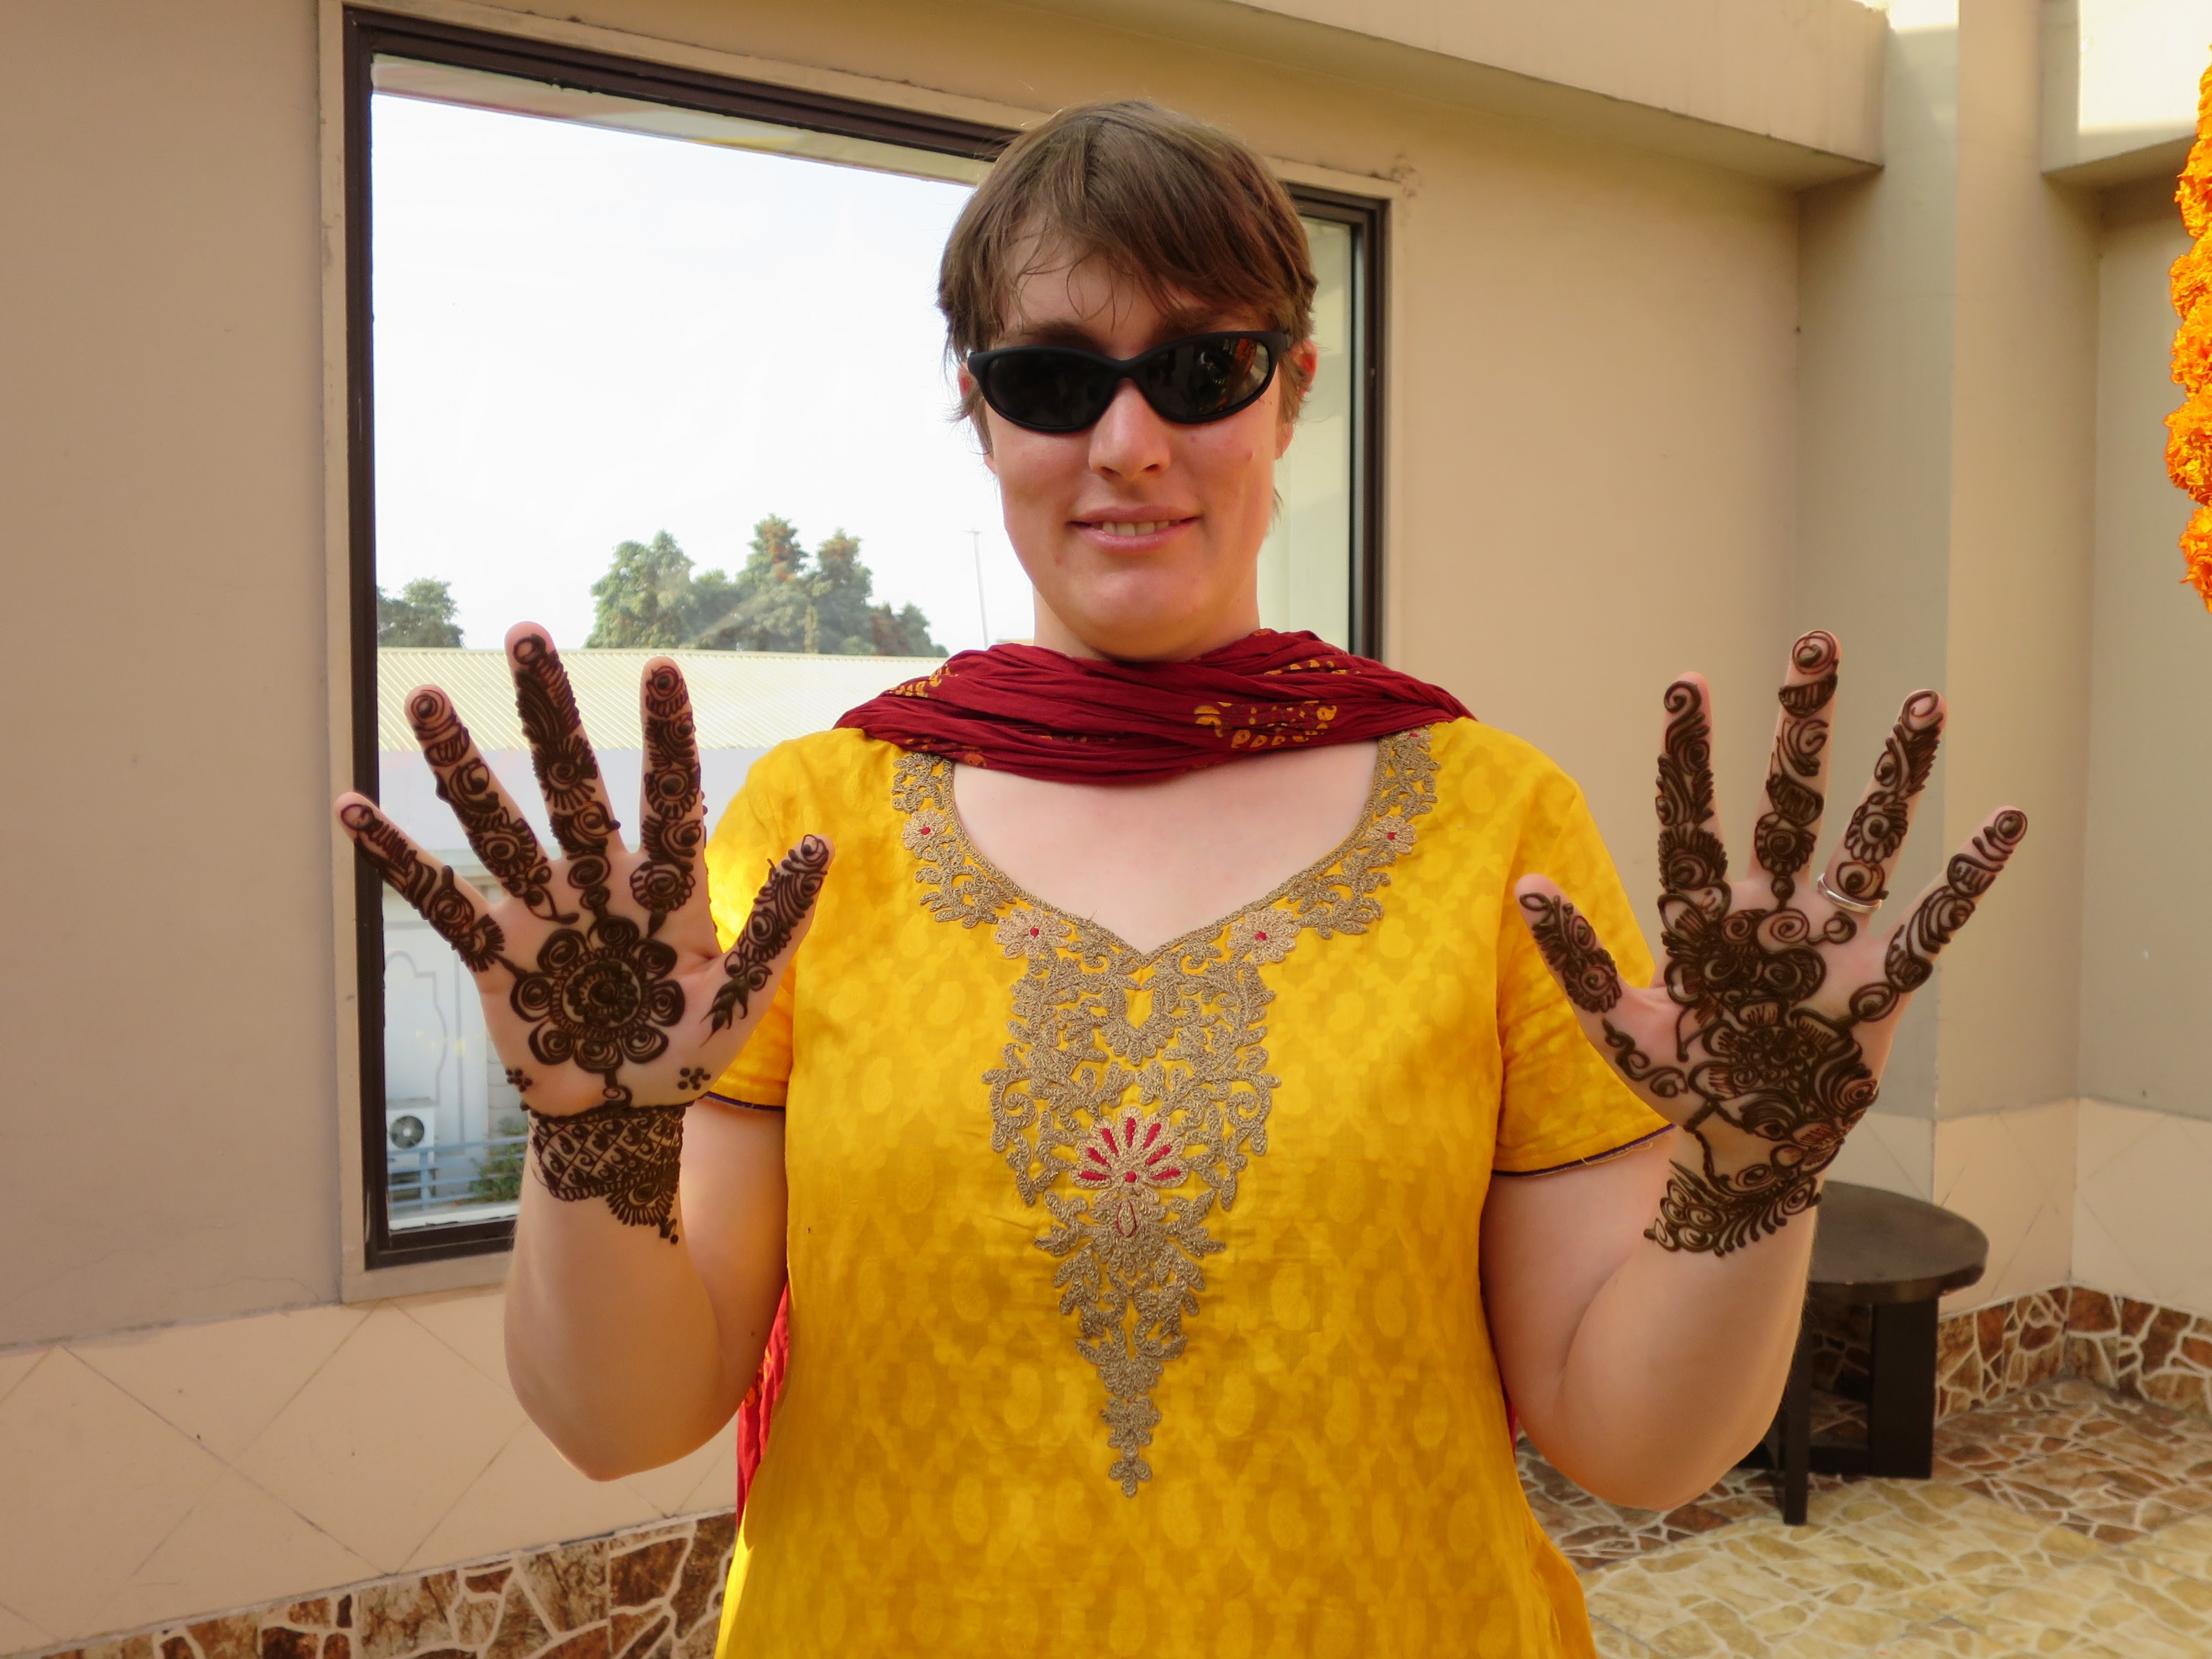 Katie, a white woman, is in the center pictured from mid-chest to the top of her forehead. She has short brown hair and is wearing black sunglasses and a slight smile. She is wearing a red scarf with dark yellow pattern backwards on her neck as a dupata. Her Indian top is bright yellow adorned with gold and dark red embroidery. She is showing the palms of her hands which have an elaborate henna design on each from four inches below the wrist to the tips of her fingers. The designs on both hands are different. She is wearing a silver wedding ring.